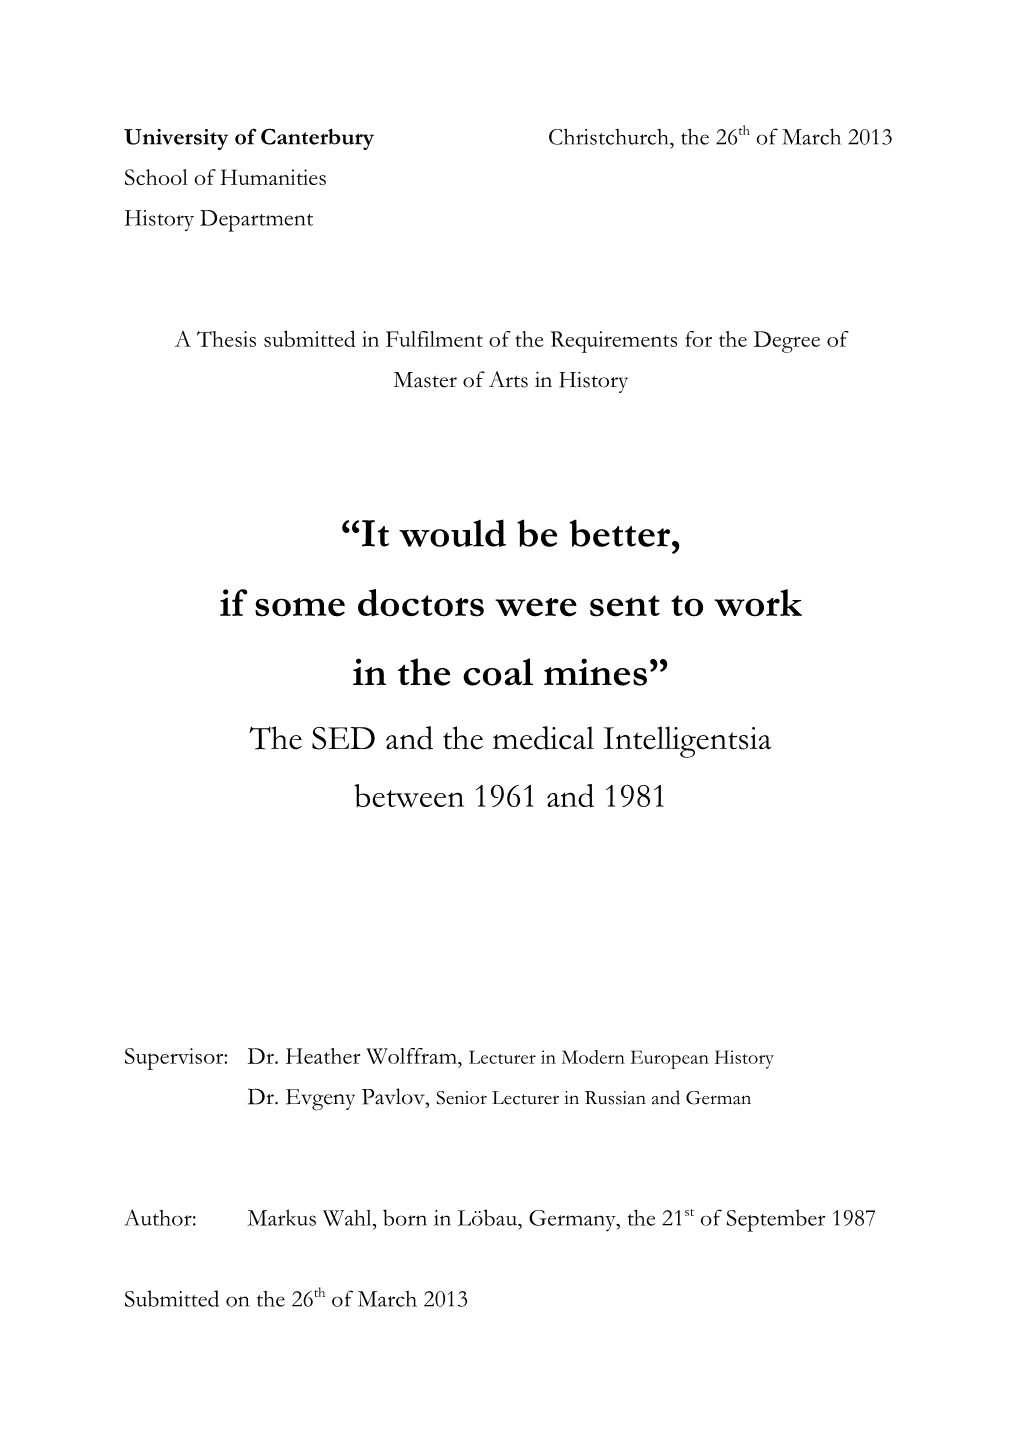 “It Would Be Better, If Some Doctors Were Sent to Work in the Coal Mines” the SED and the Medical Intelligentsia Between 1961 and 1981